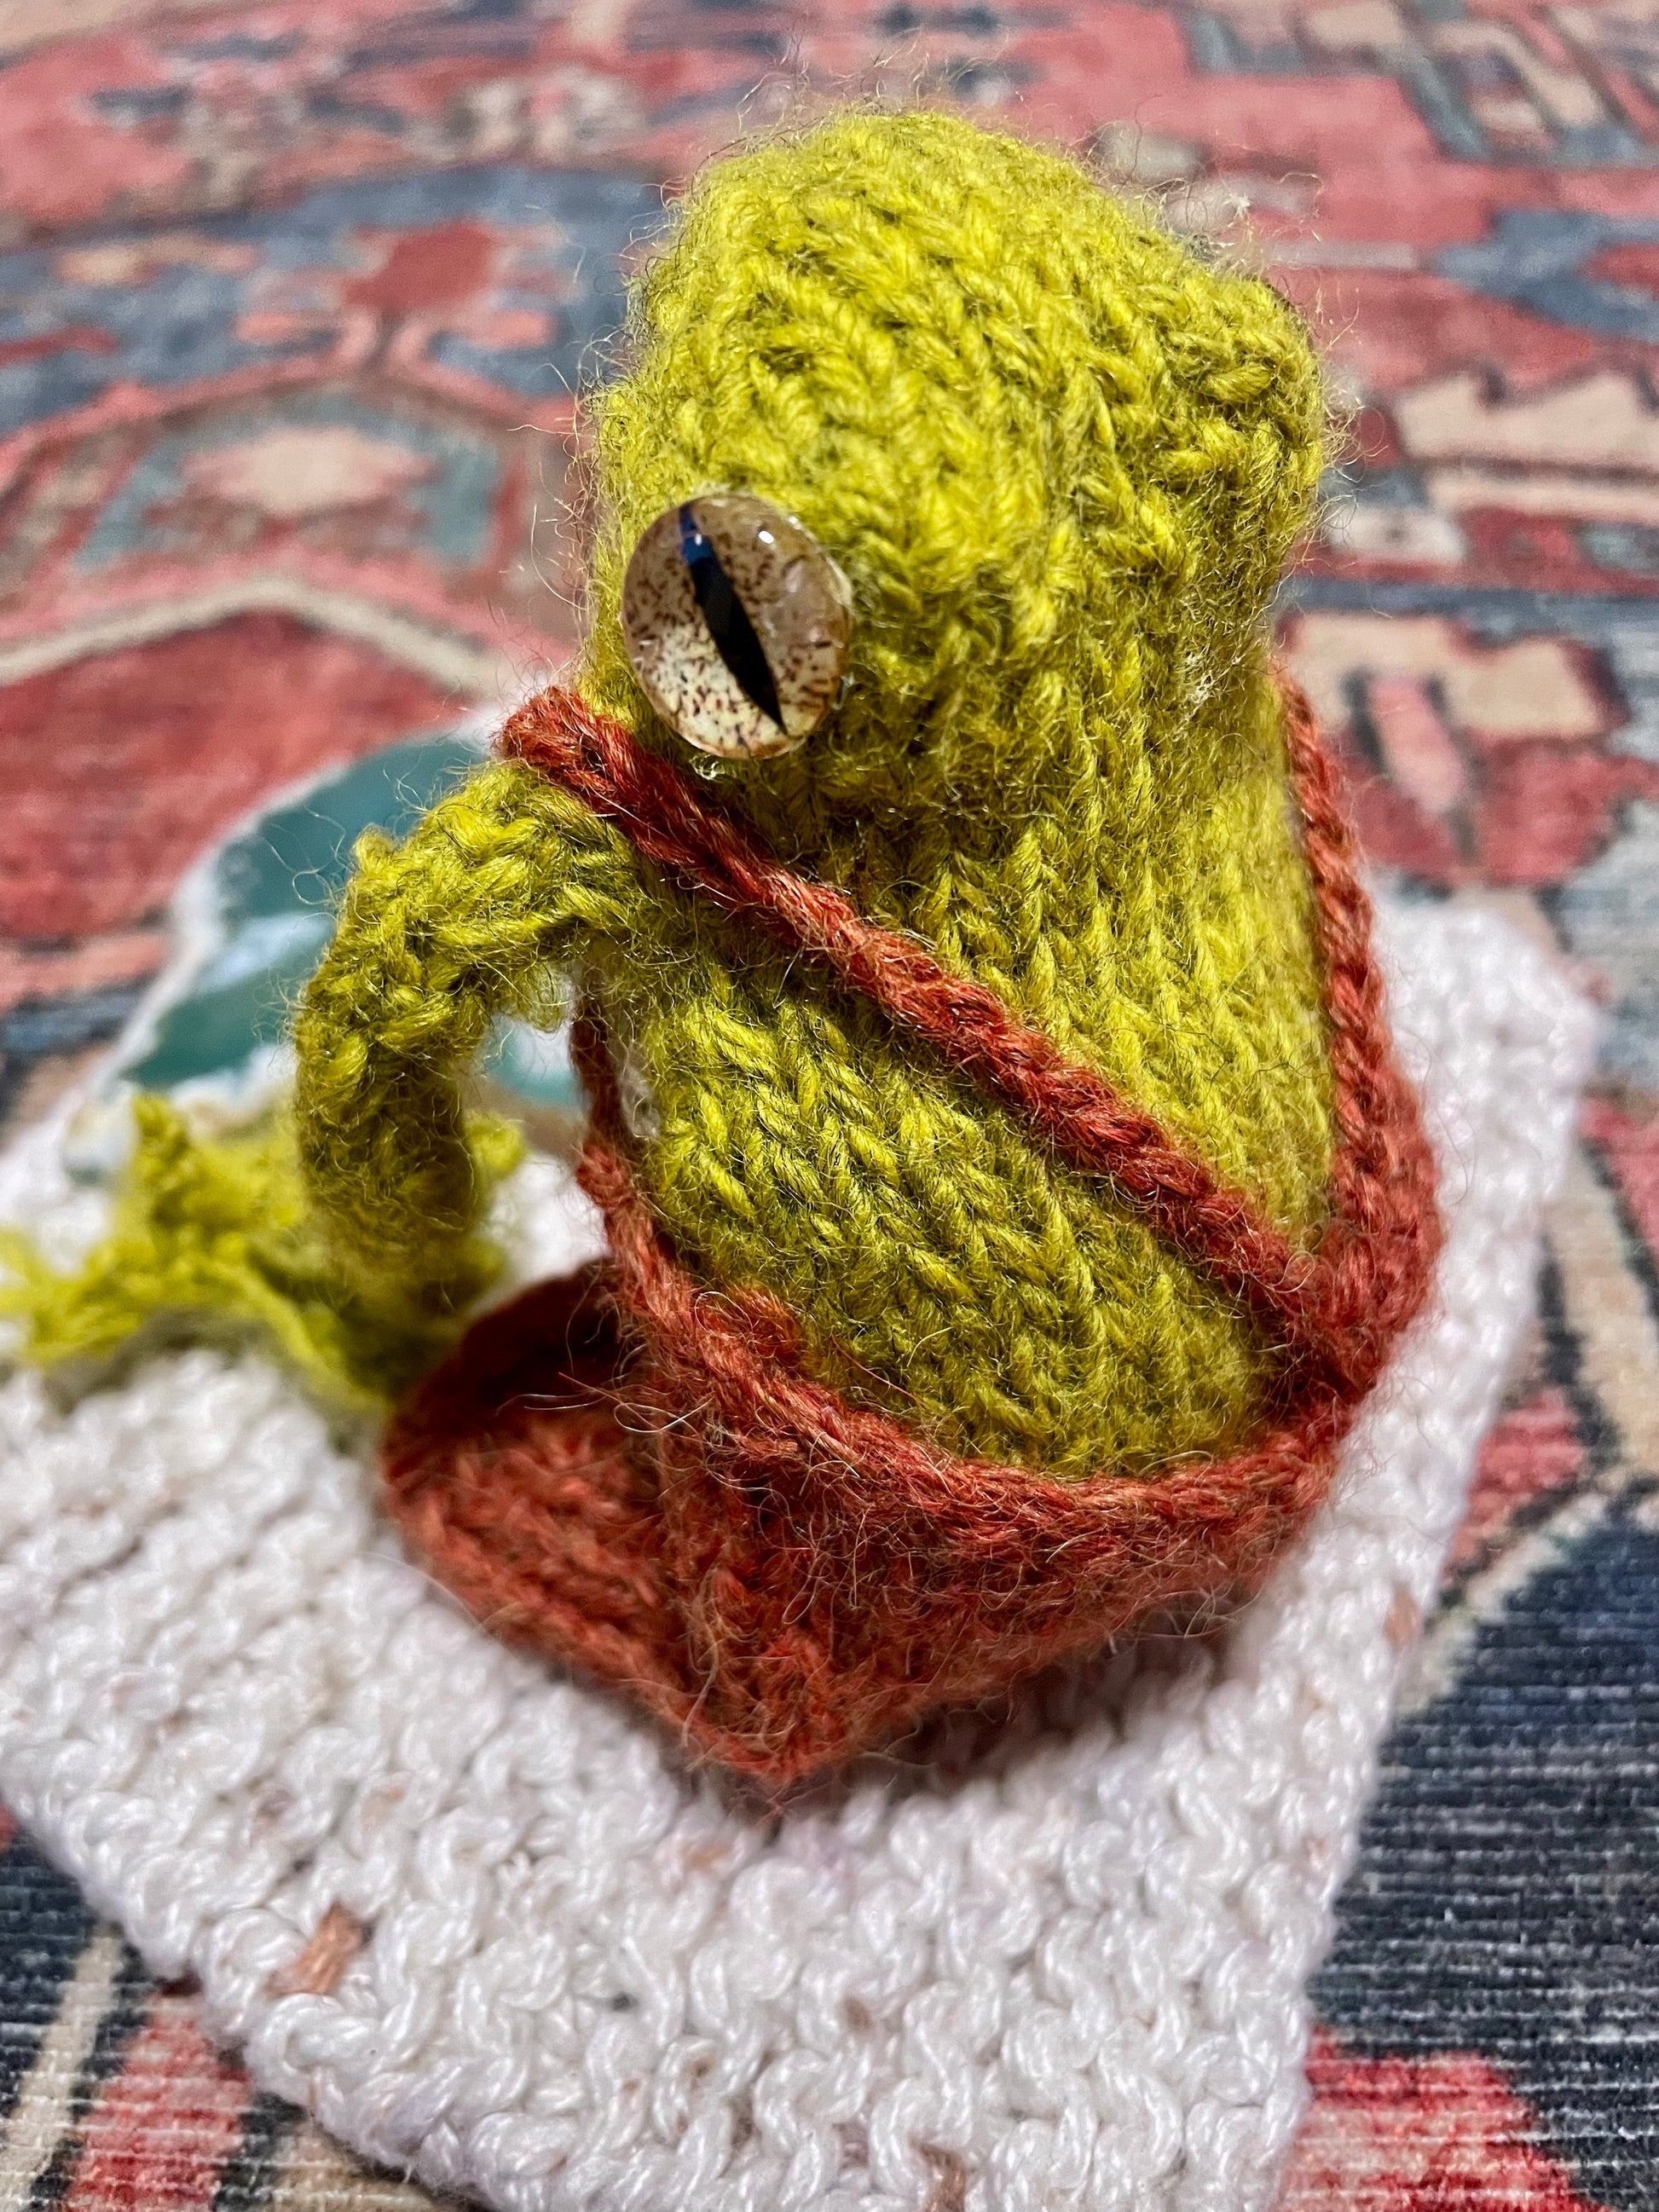 knitknitfrog: Home made things